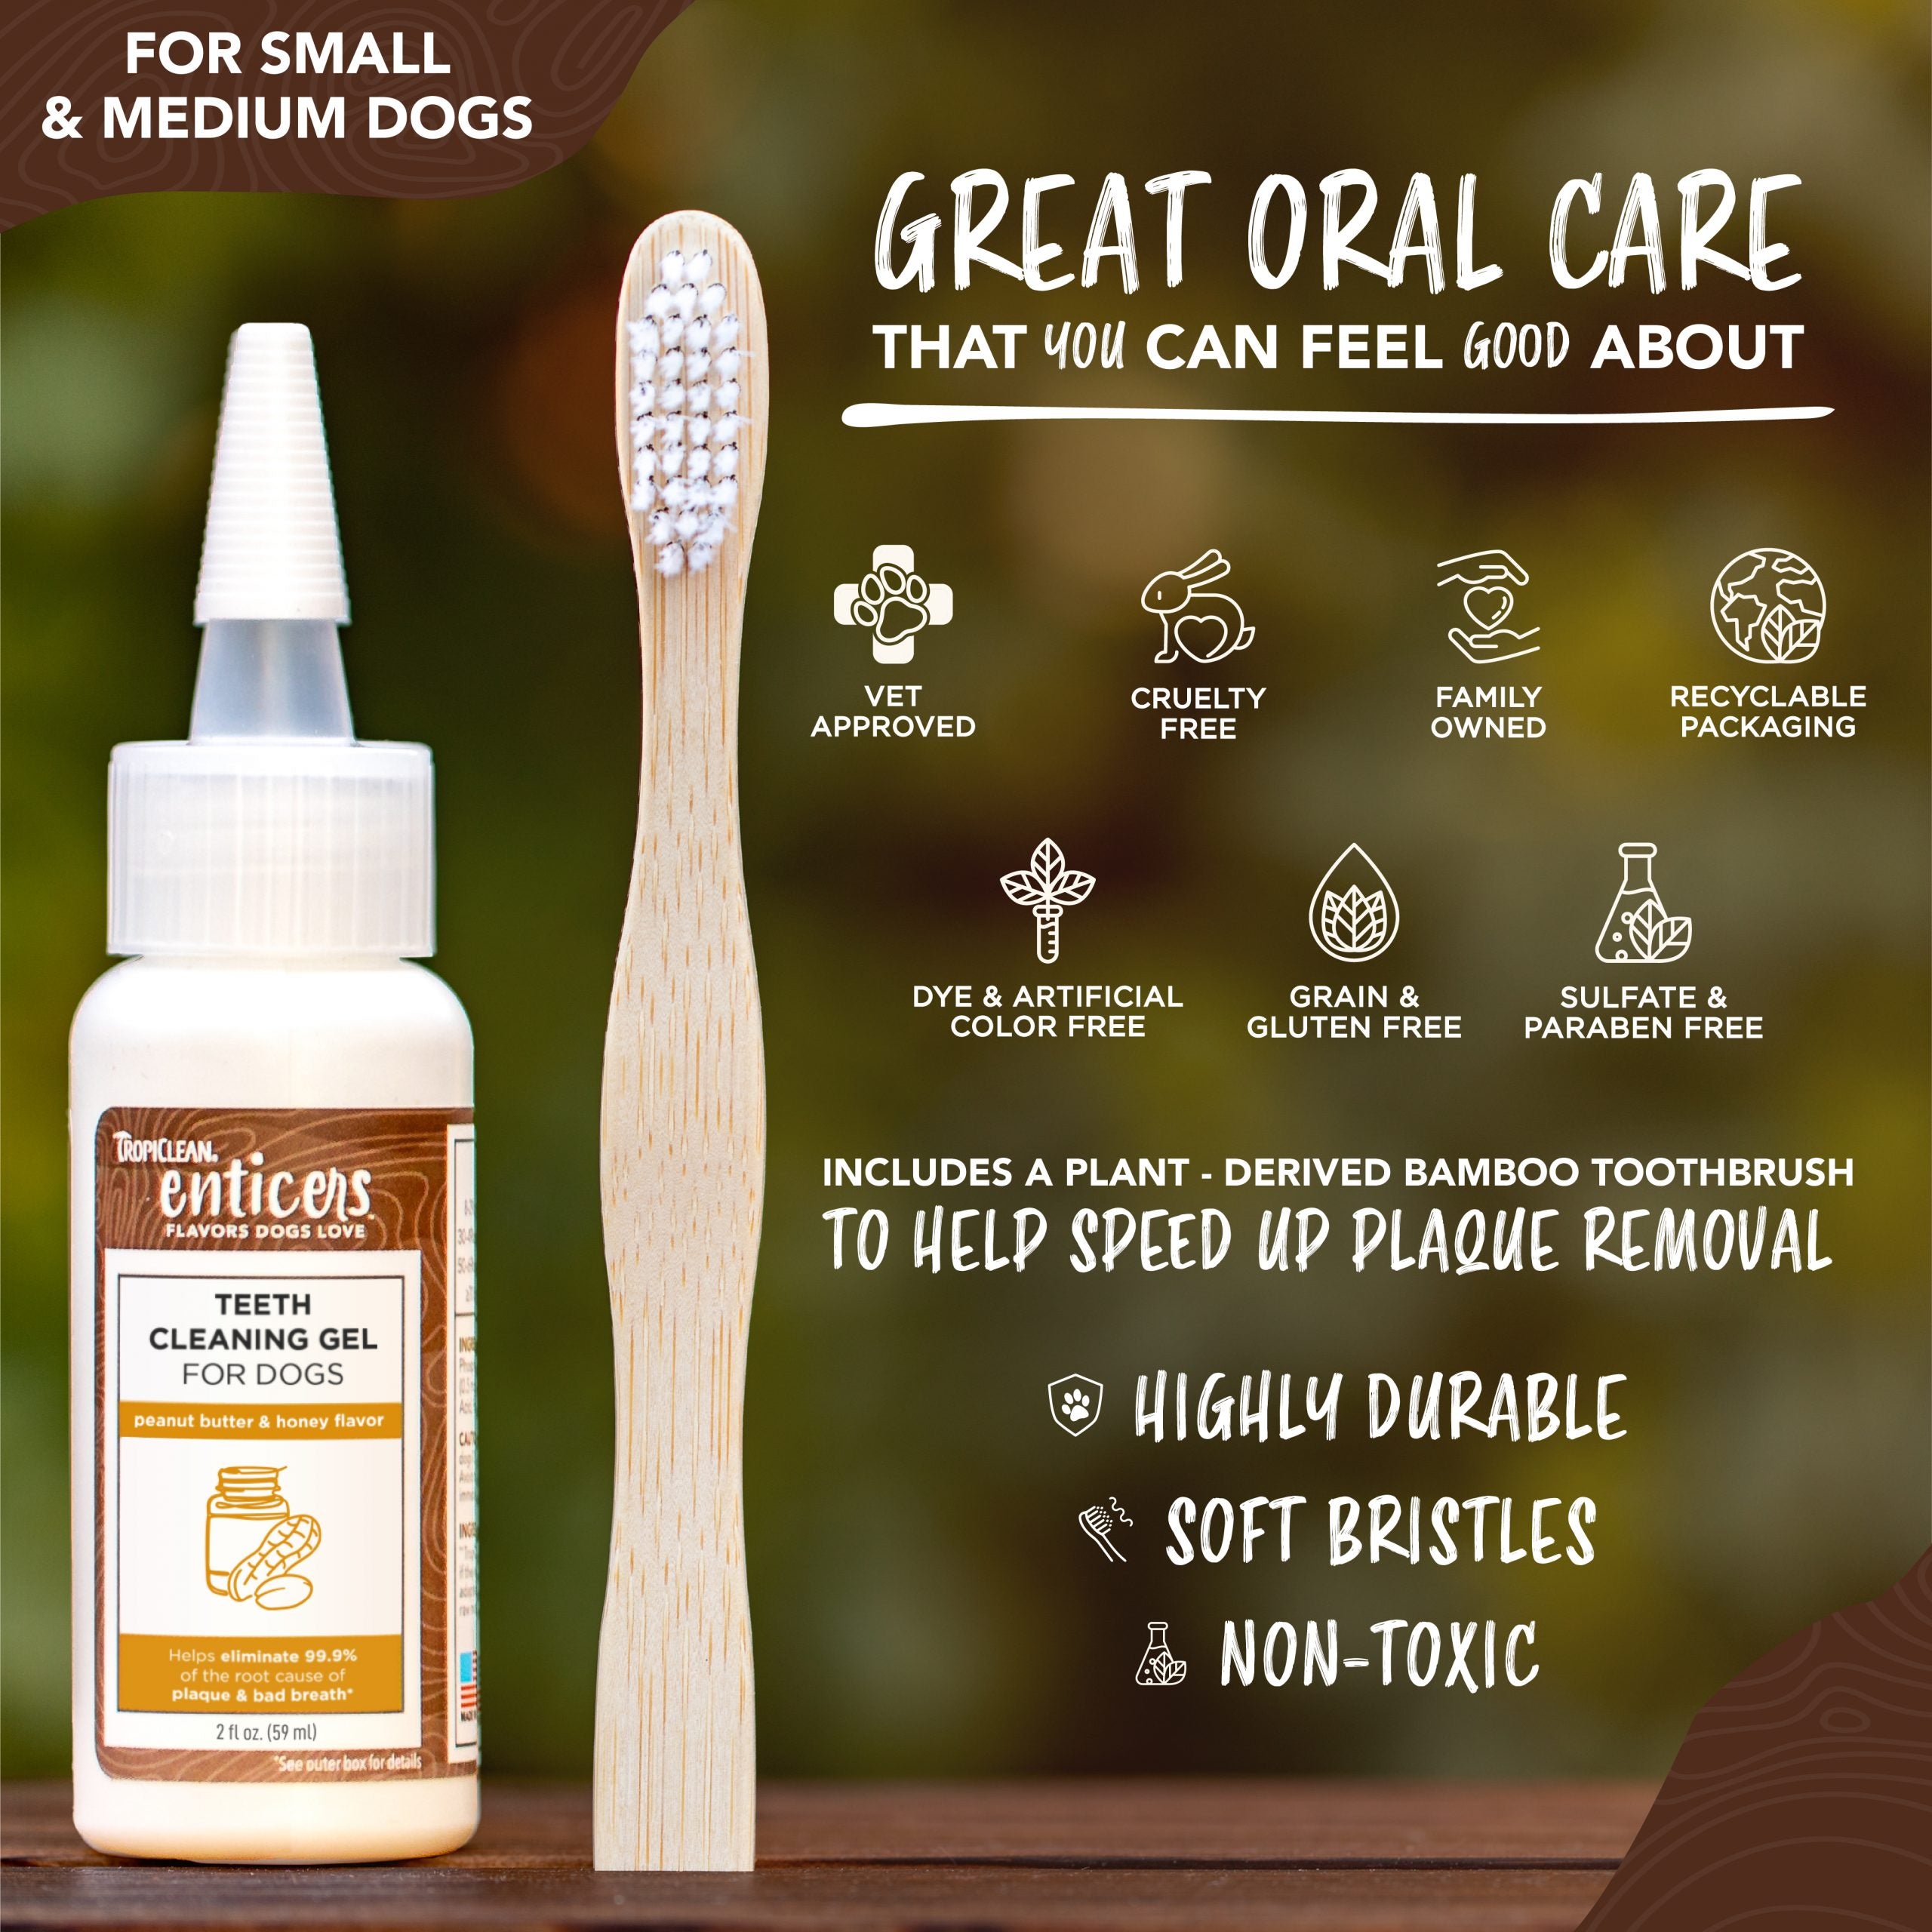 TropiClean - enticers | Cleaning Gel & ToothBrush (For Dogs)